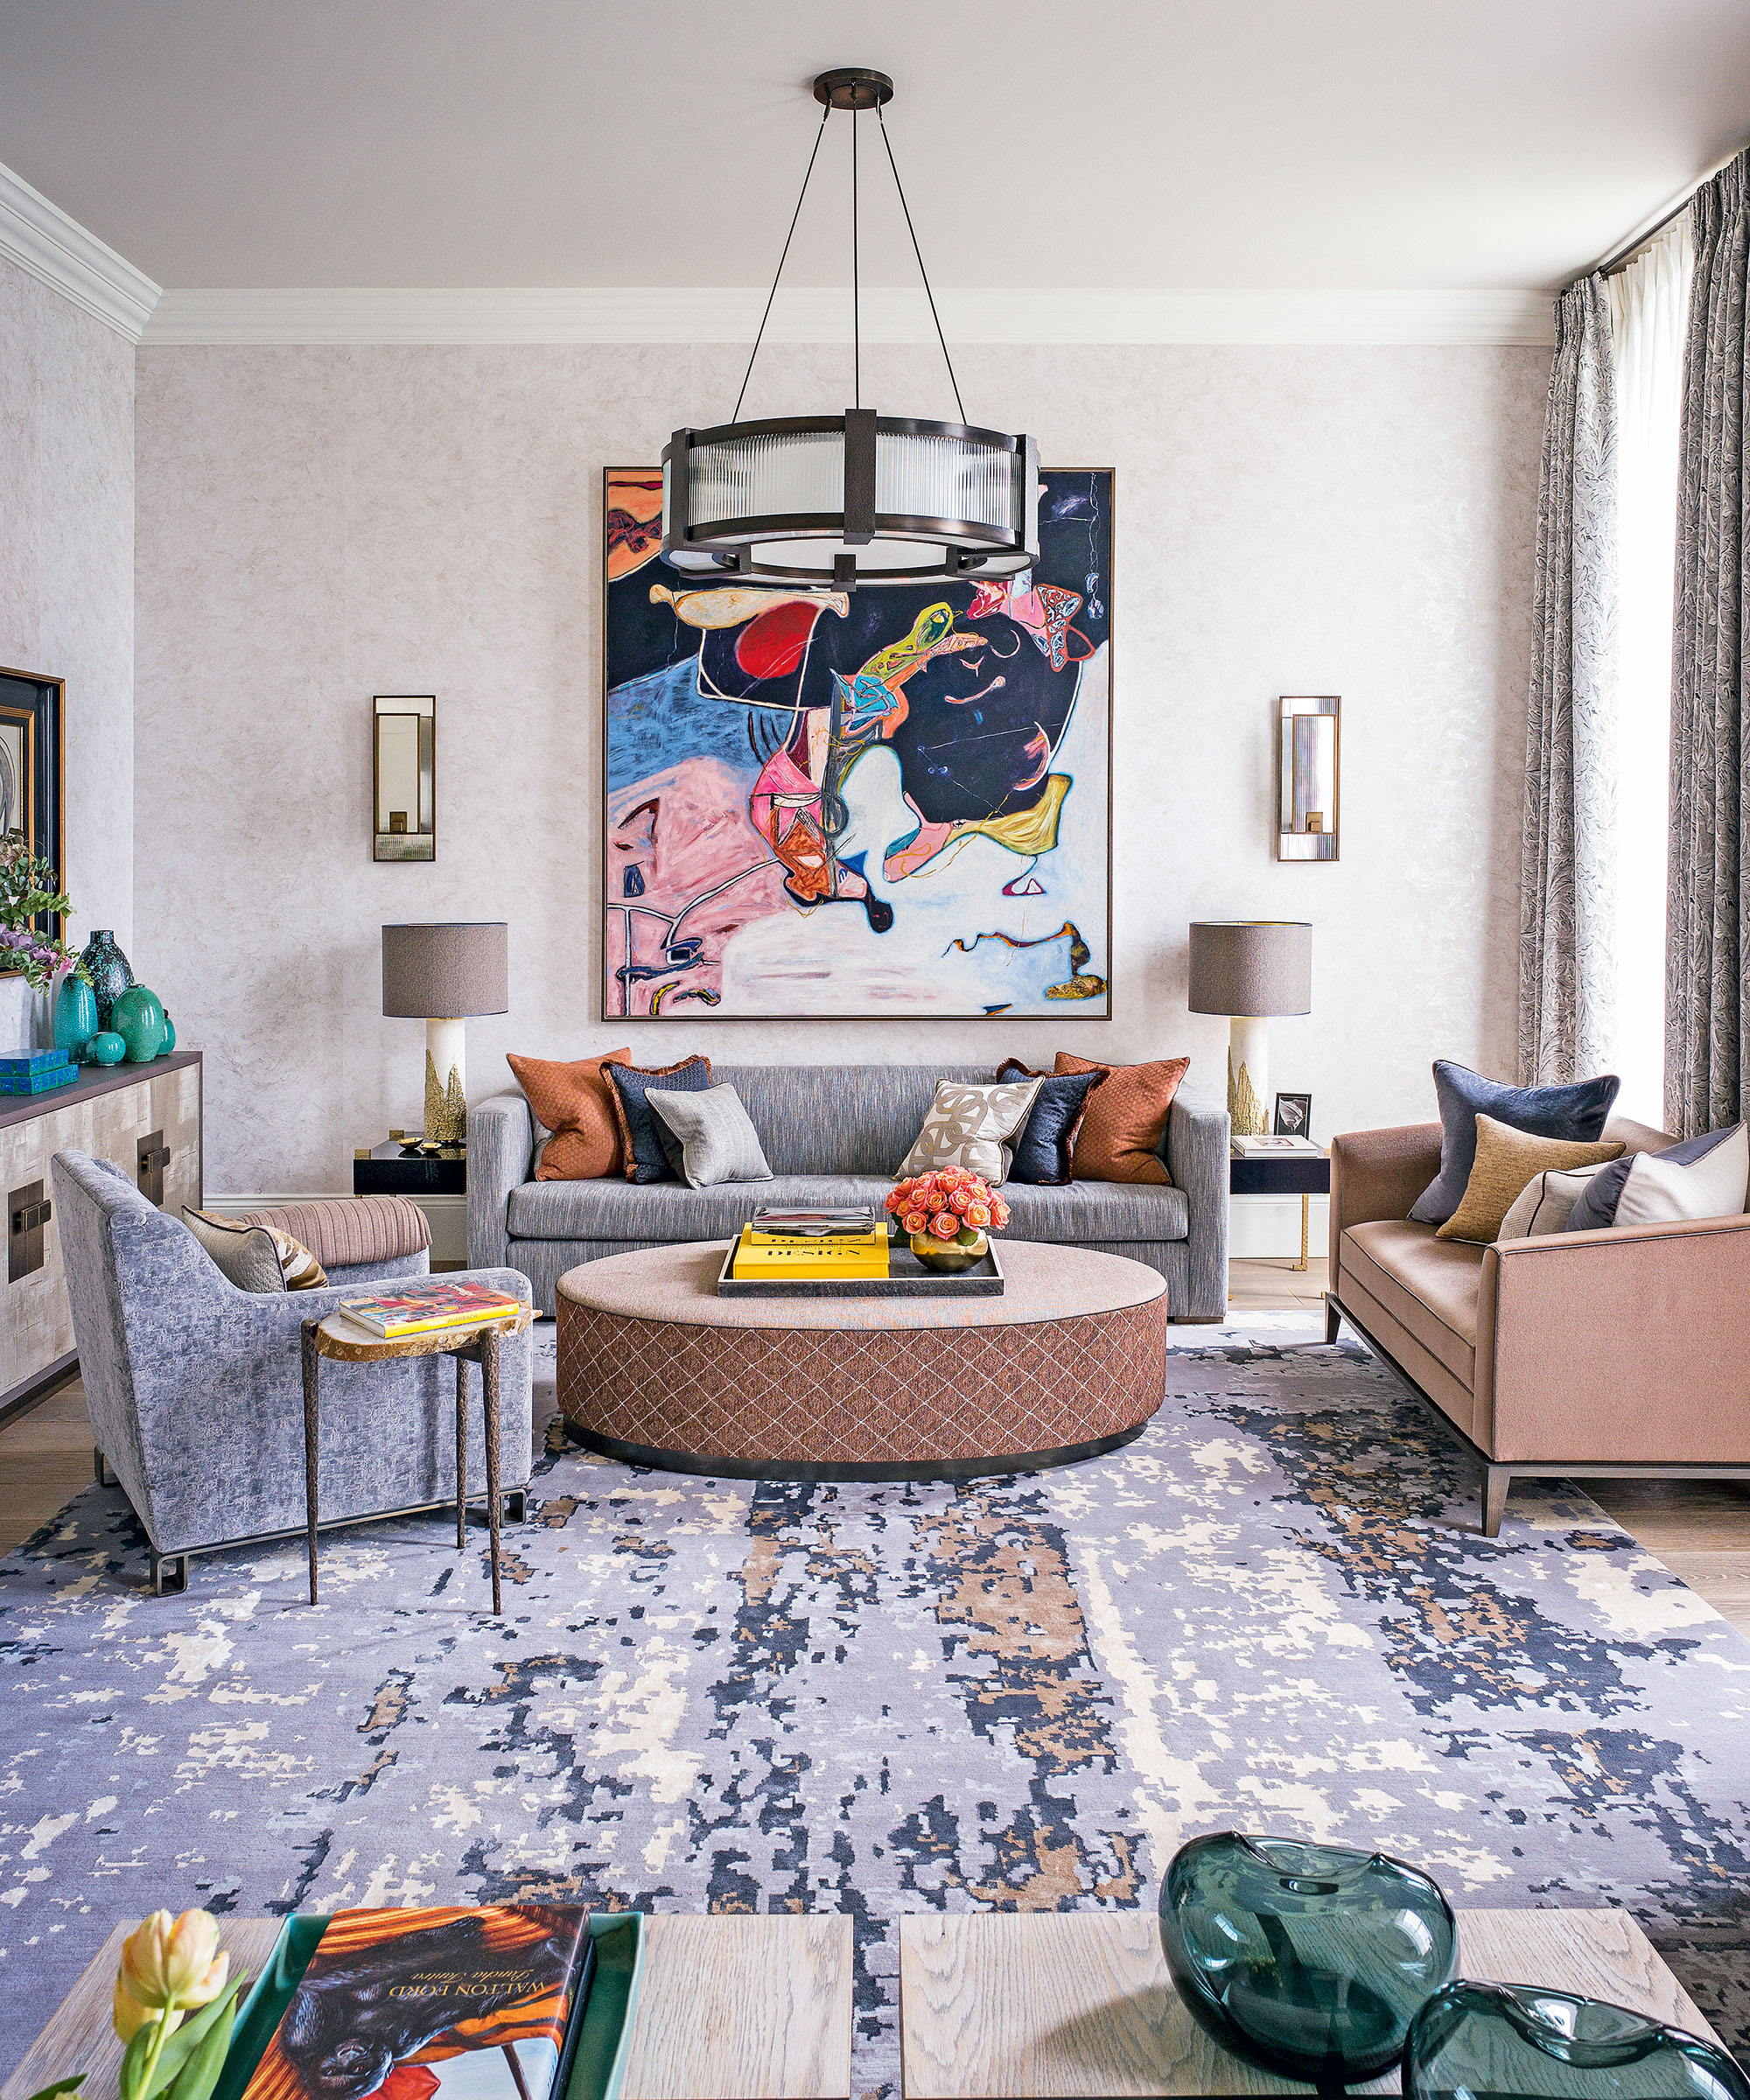 Living room ideas with bold artwork and modern furnishings